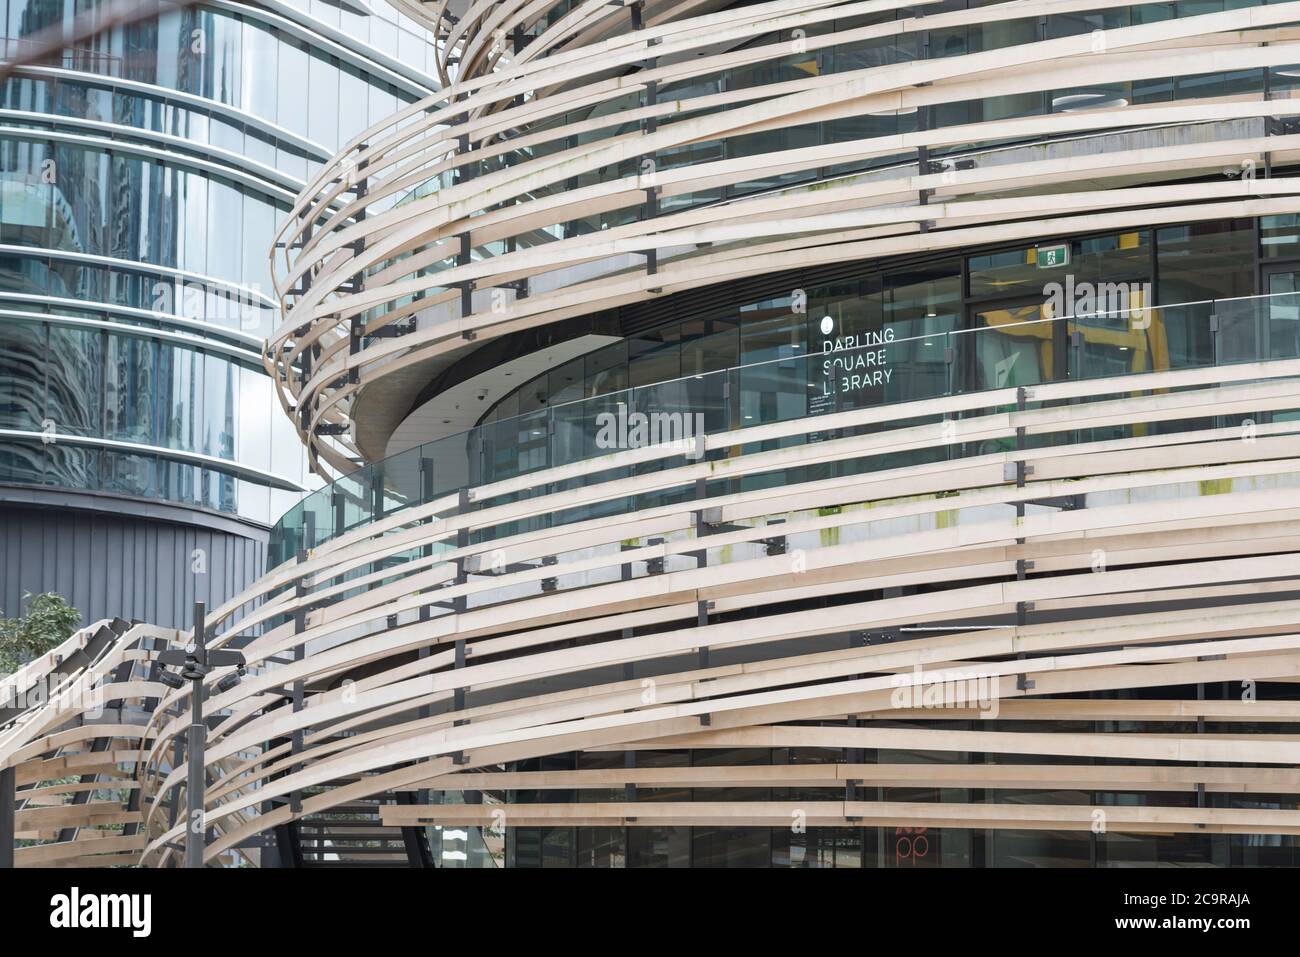 The new Exchange Building in Darling Square, Sydney, Australia, designed by Japanese architecural firm Kengo Kuma is wrapped in 20km of Accoya timber Stock Photo